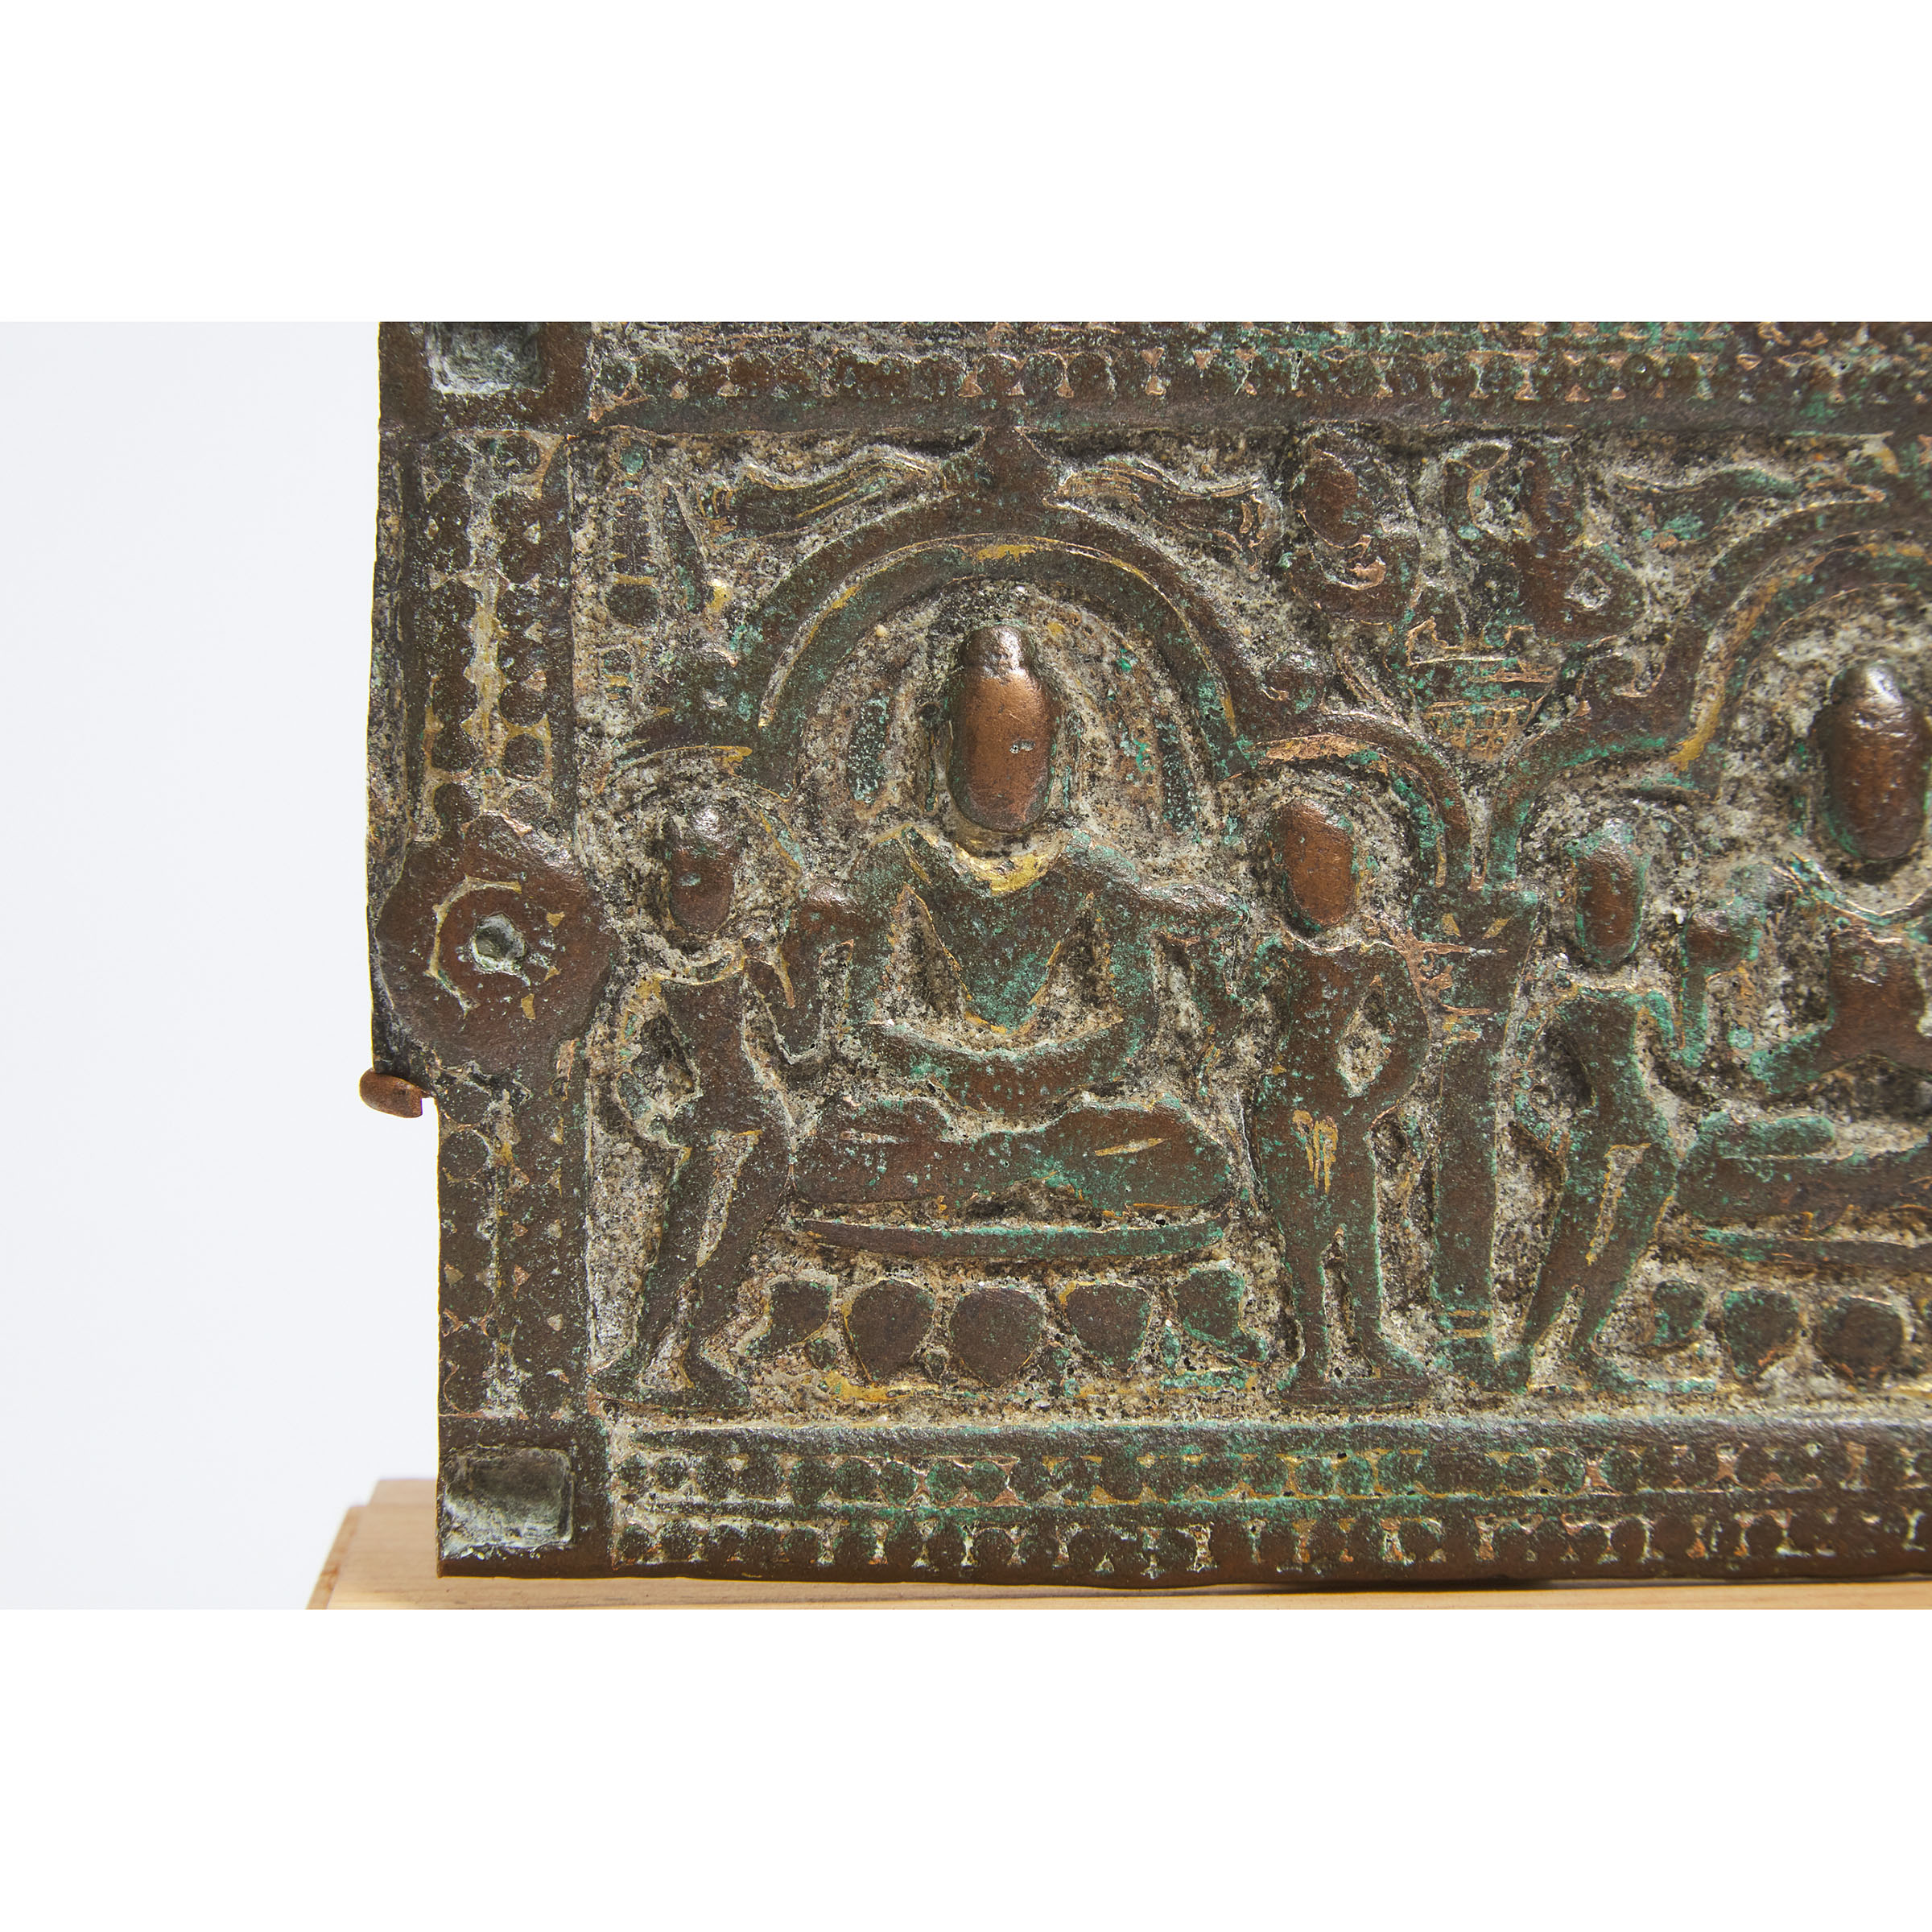 A Pala Bronze Plaque Inlaid with Gold Wire, India, 9th Century or Later